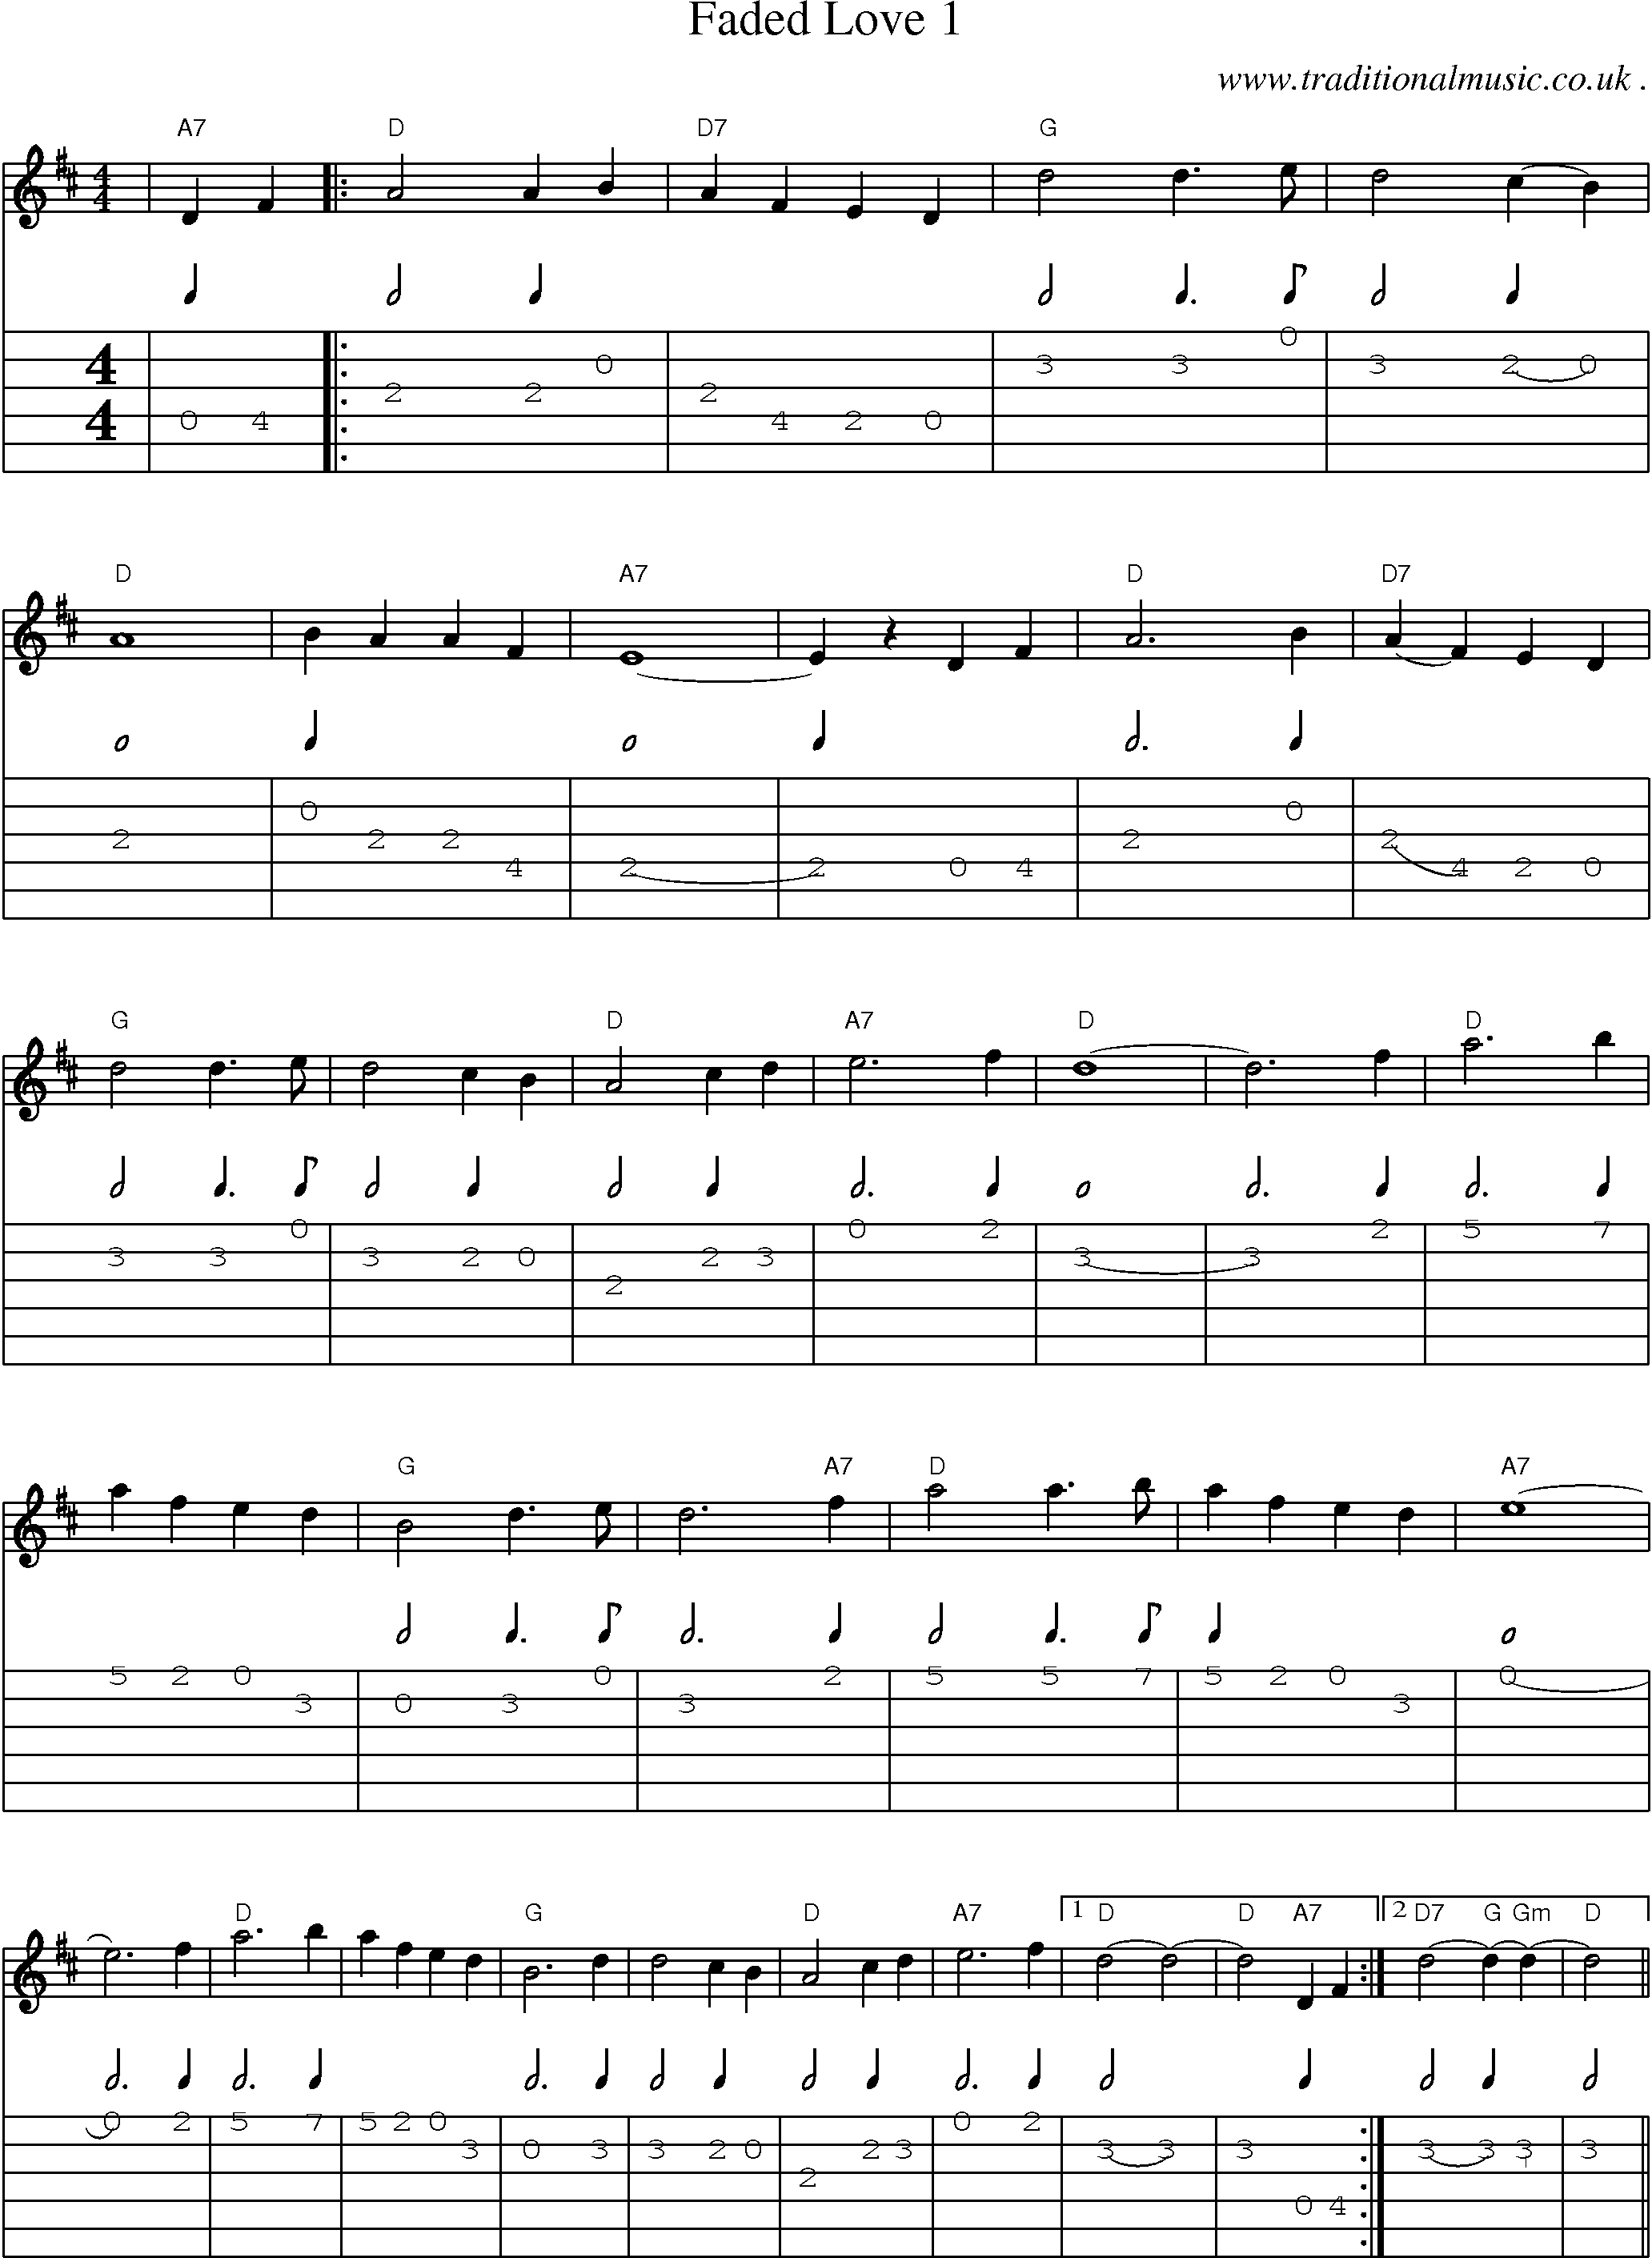 Music Score and Guitar Tabs for Faded Love 1